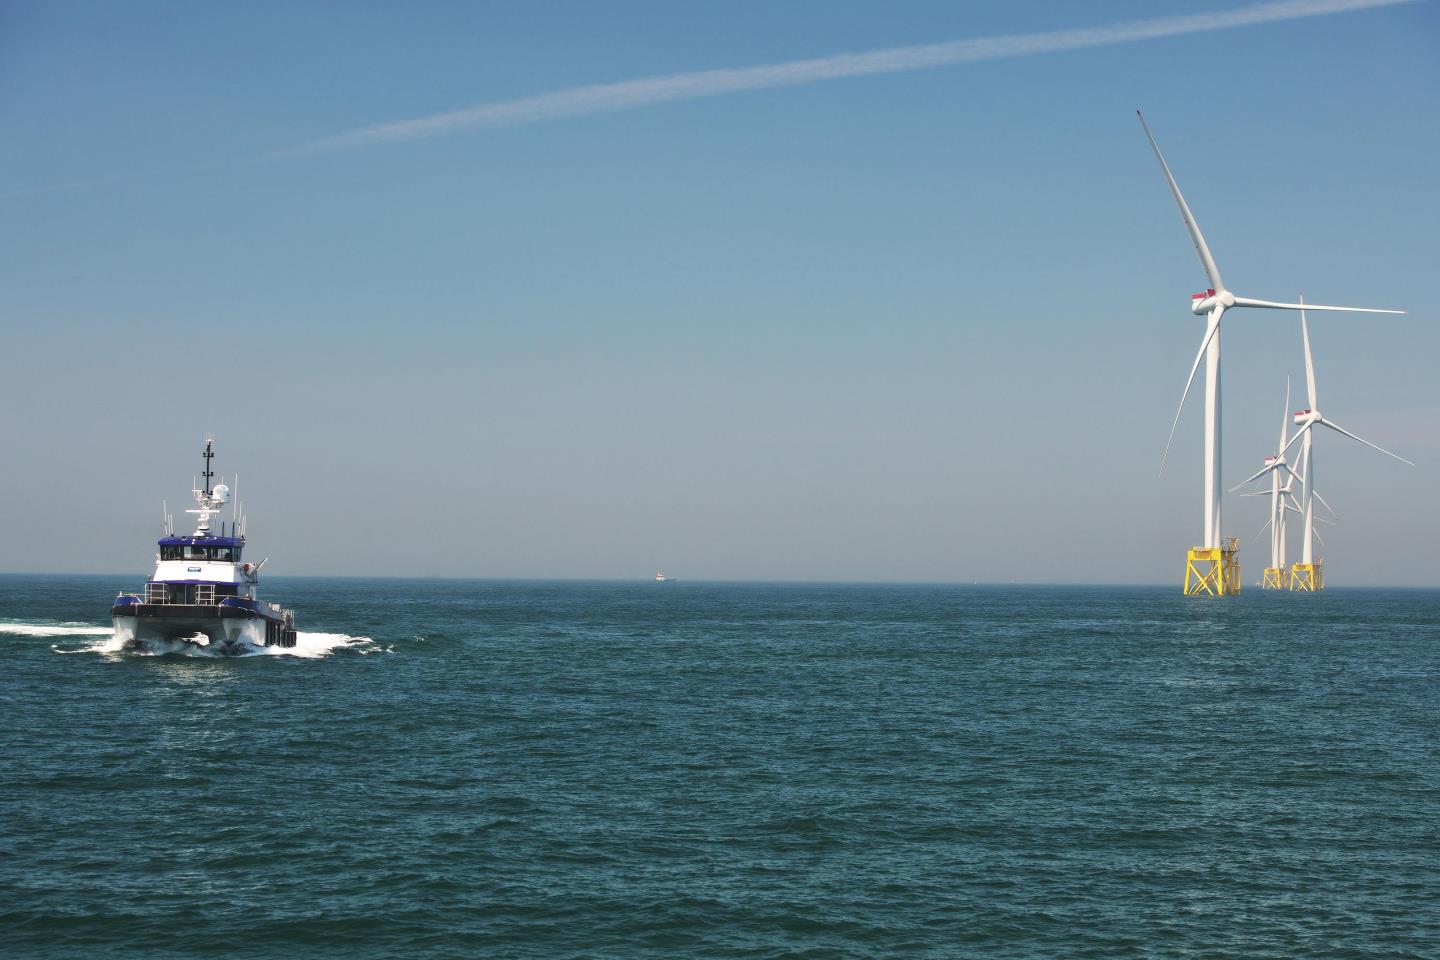 Floating offshore wind energy will feature off the Scottish coast.